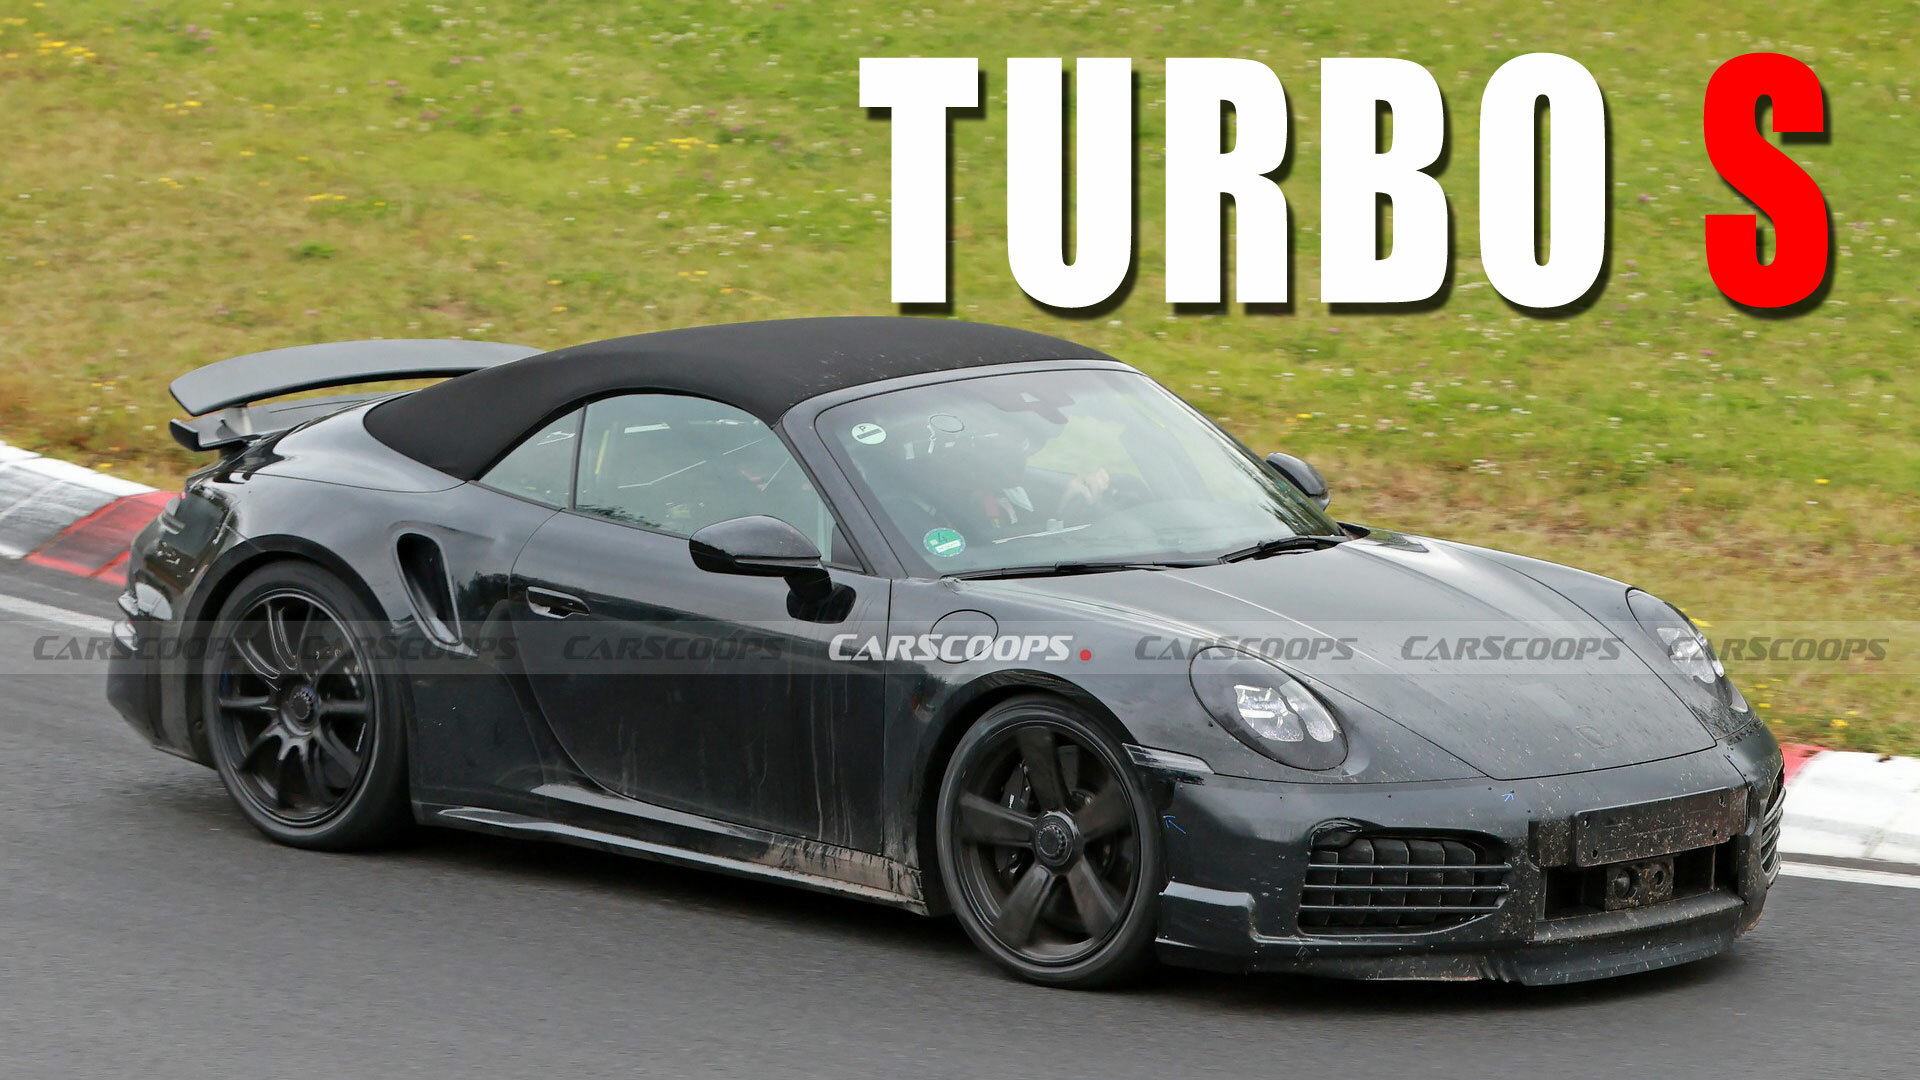 2026 Porsche 911 Turbo S Cabriolet Could Be A Nearly 700 HP Hybrid